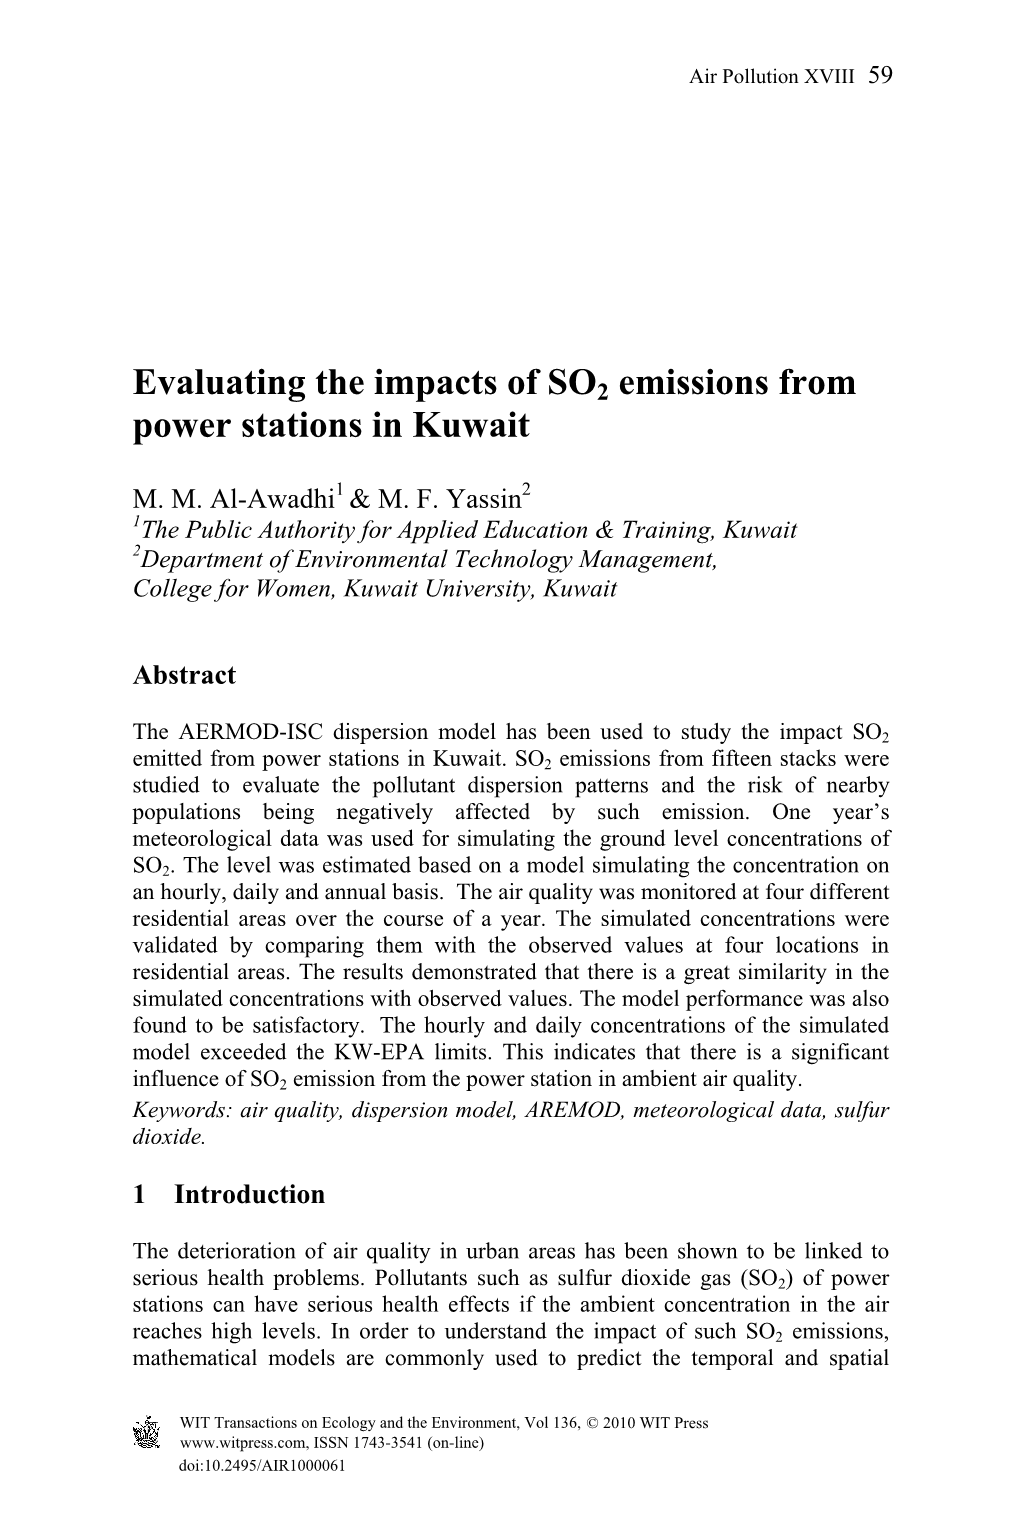 Evaluating the Impacts of SO2 Emissions from Power Stations in Kuwait